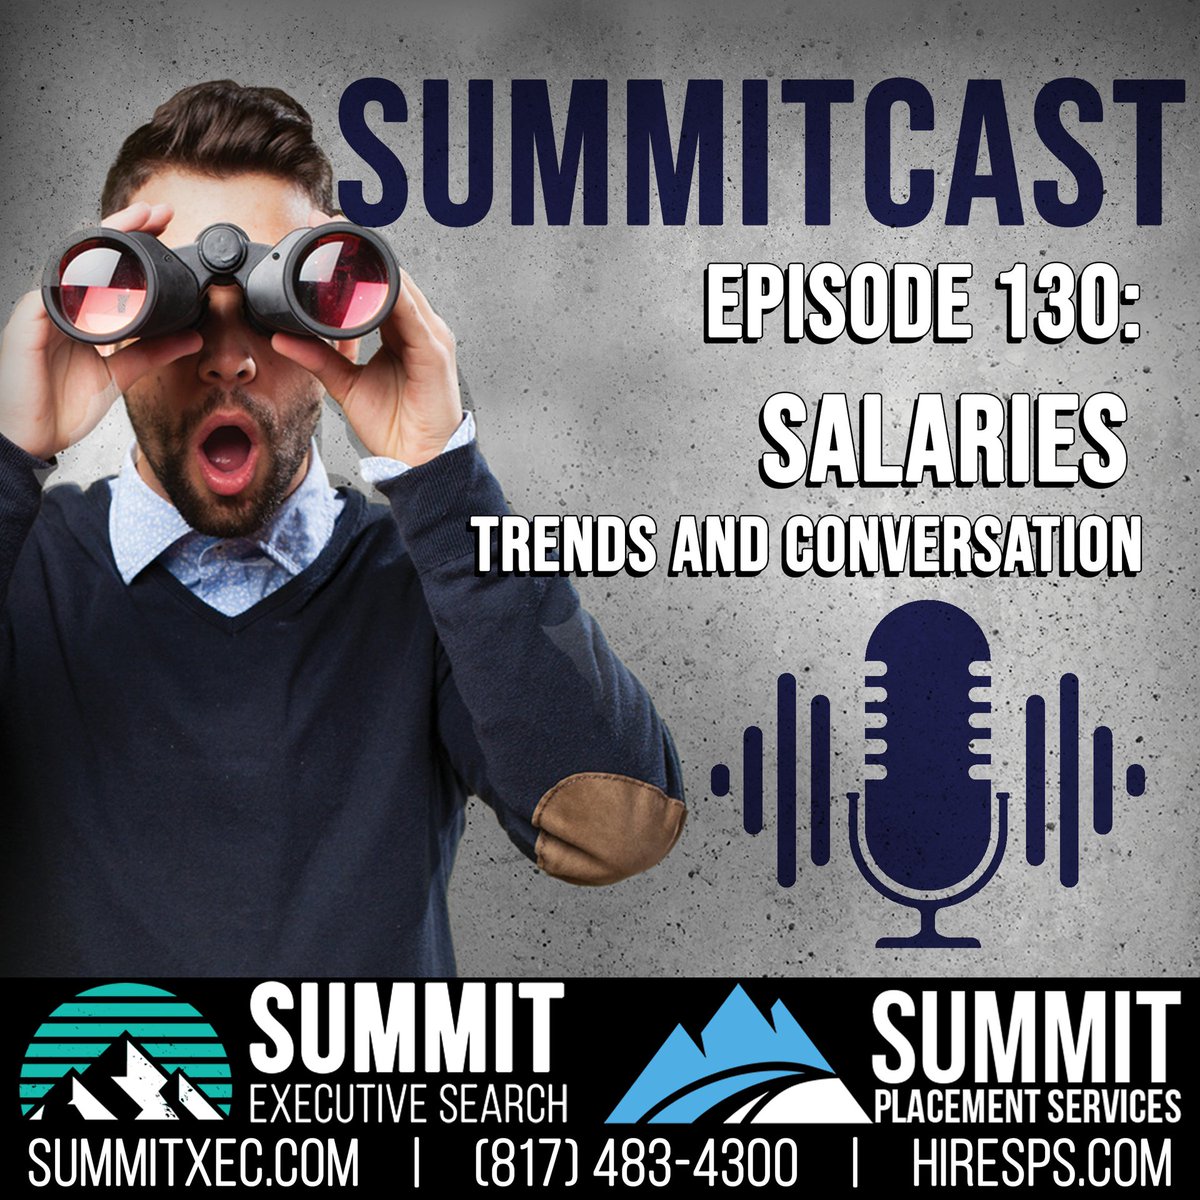 On #TodaysEpisode of the #SummitCast we have an opportunity to relax and chat about #Salaries  changes, trends and let it rip
podcast.summitxec.com/PodcastGenerat…